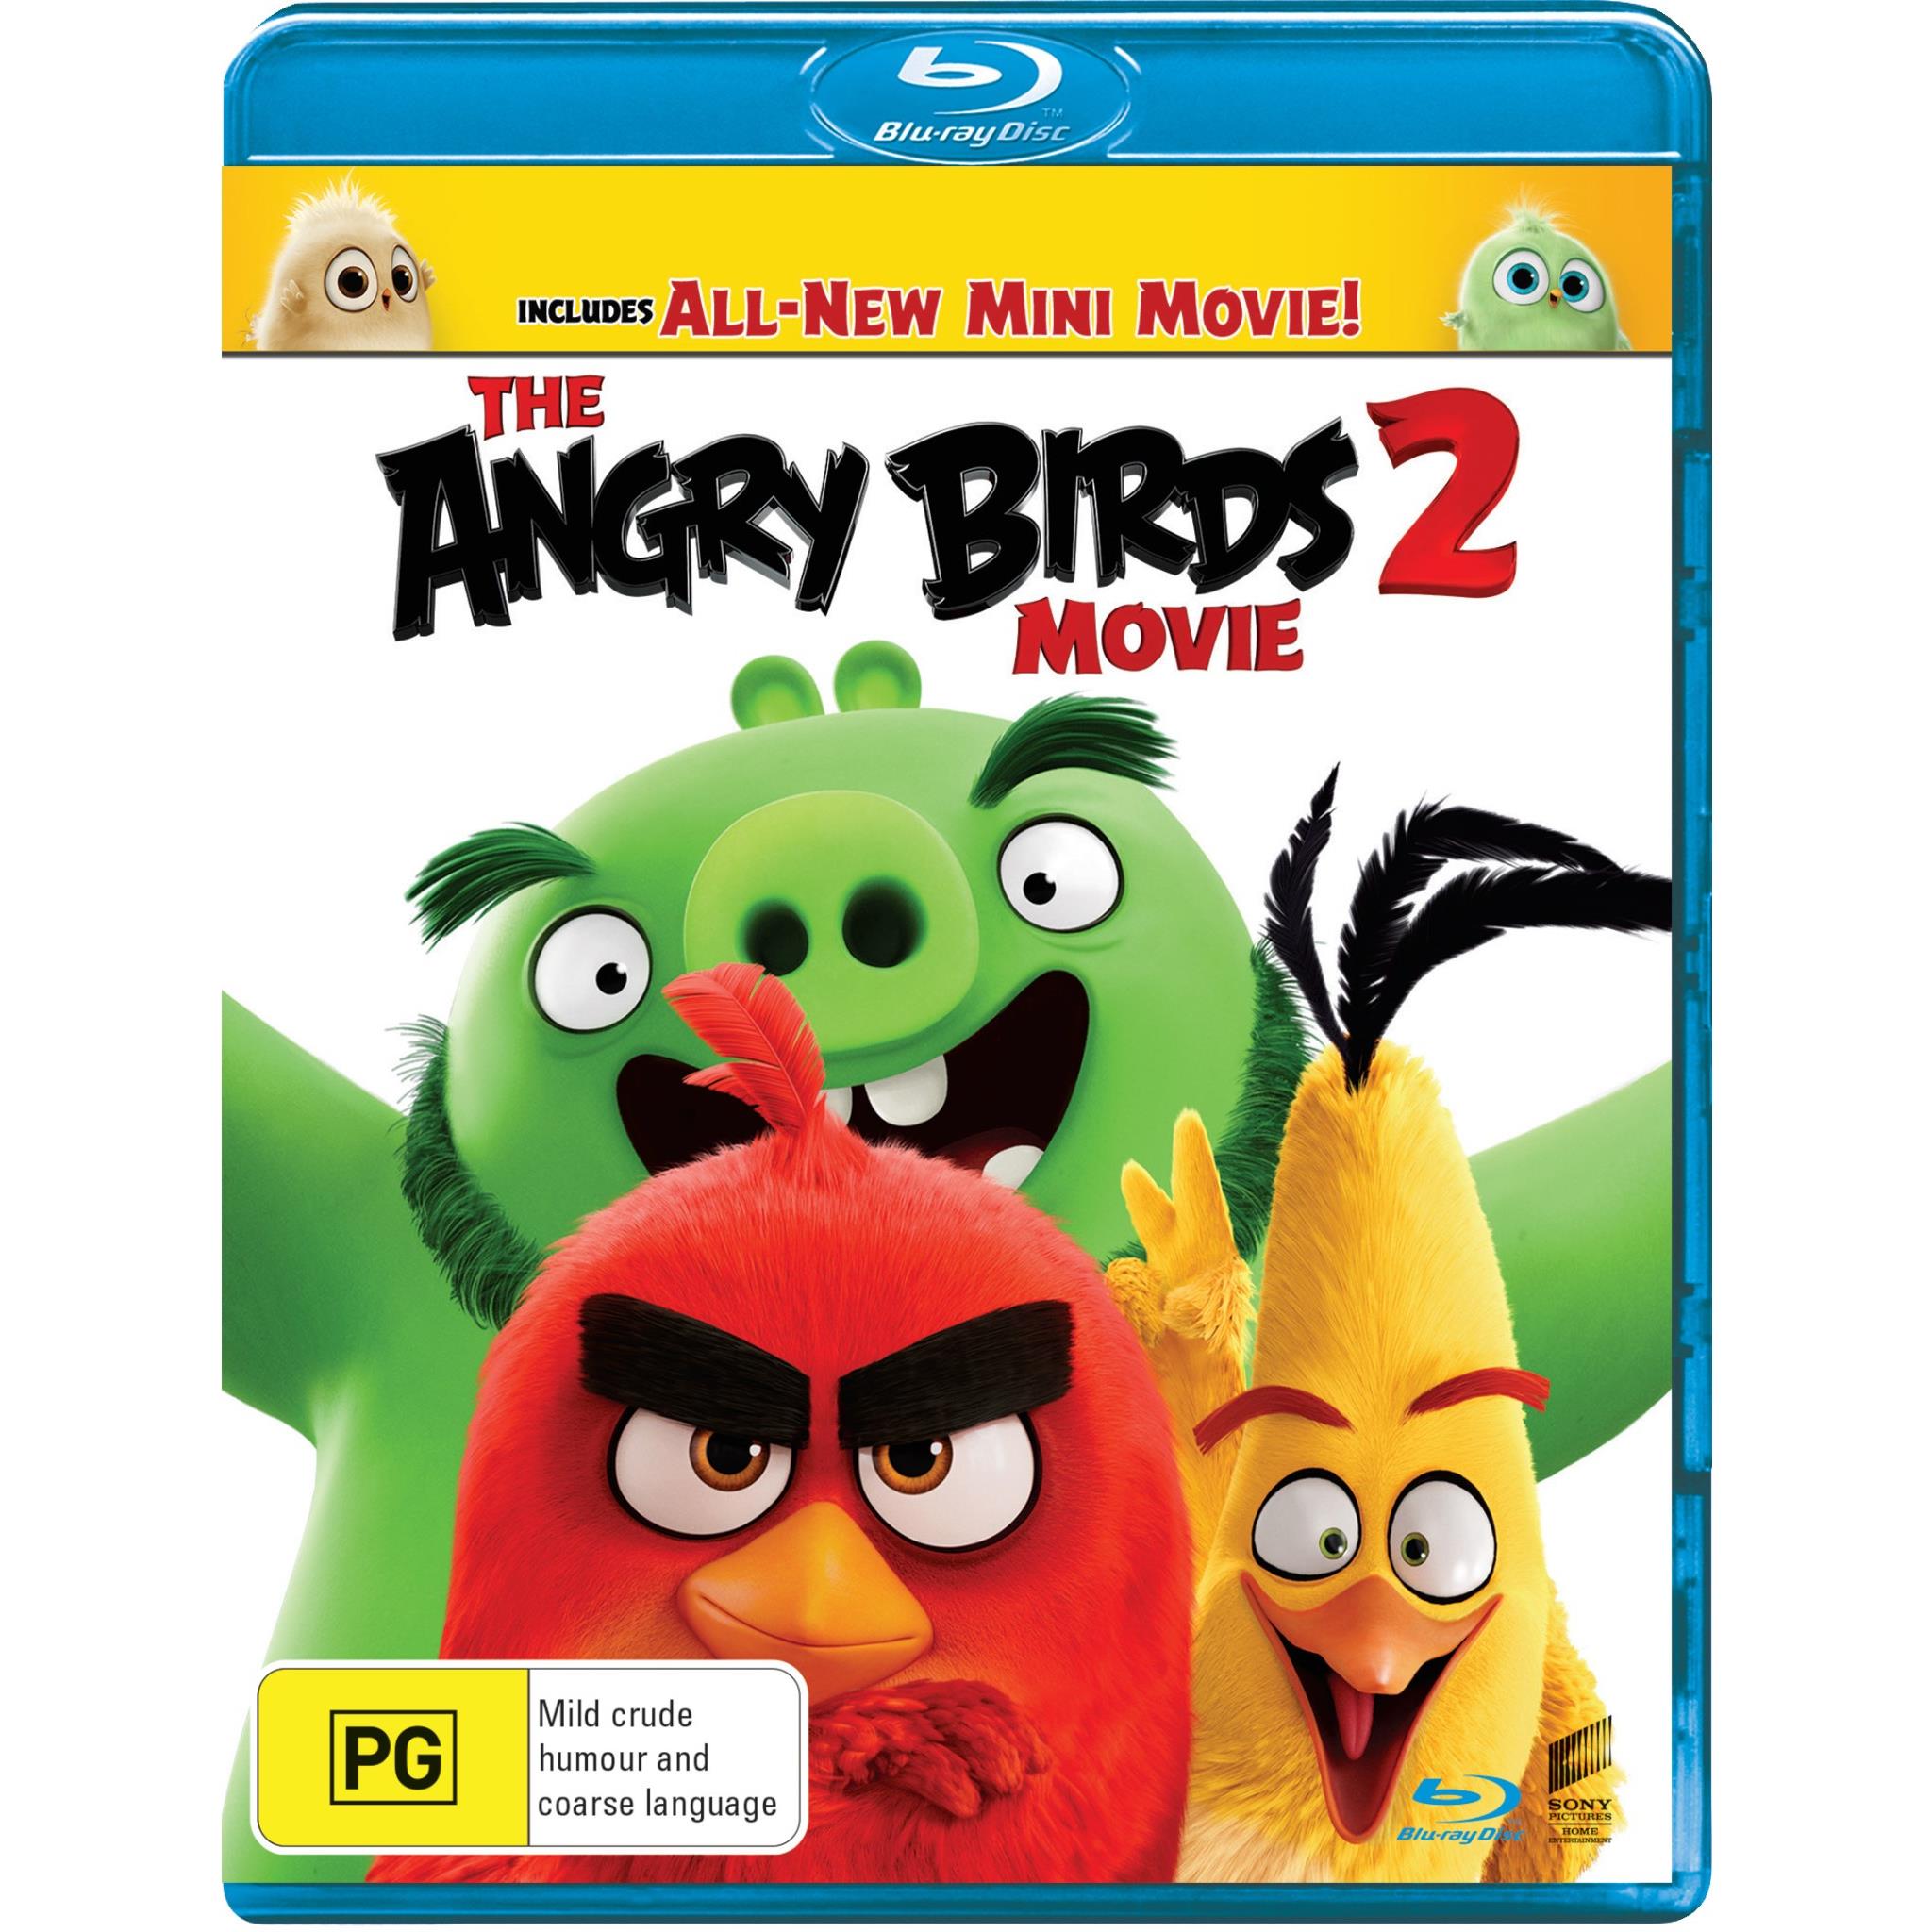 Angry Birds 2 on PC - Beginner's Guide & Gameplay